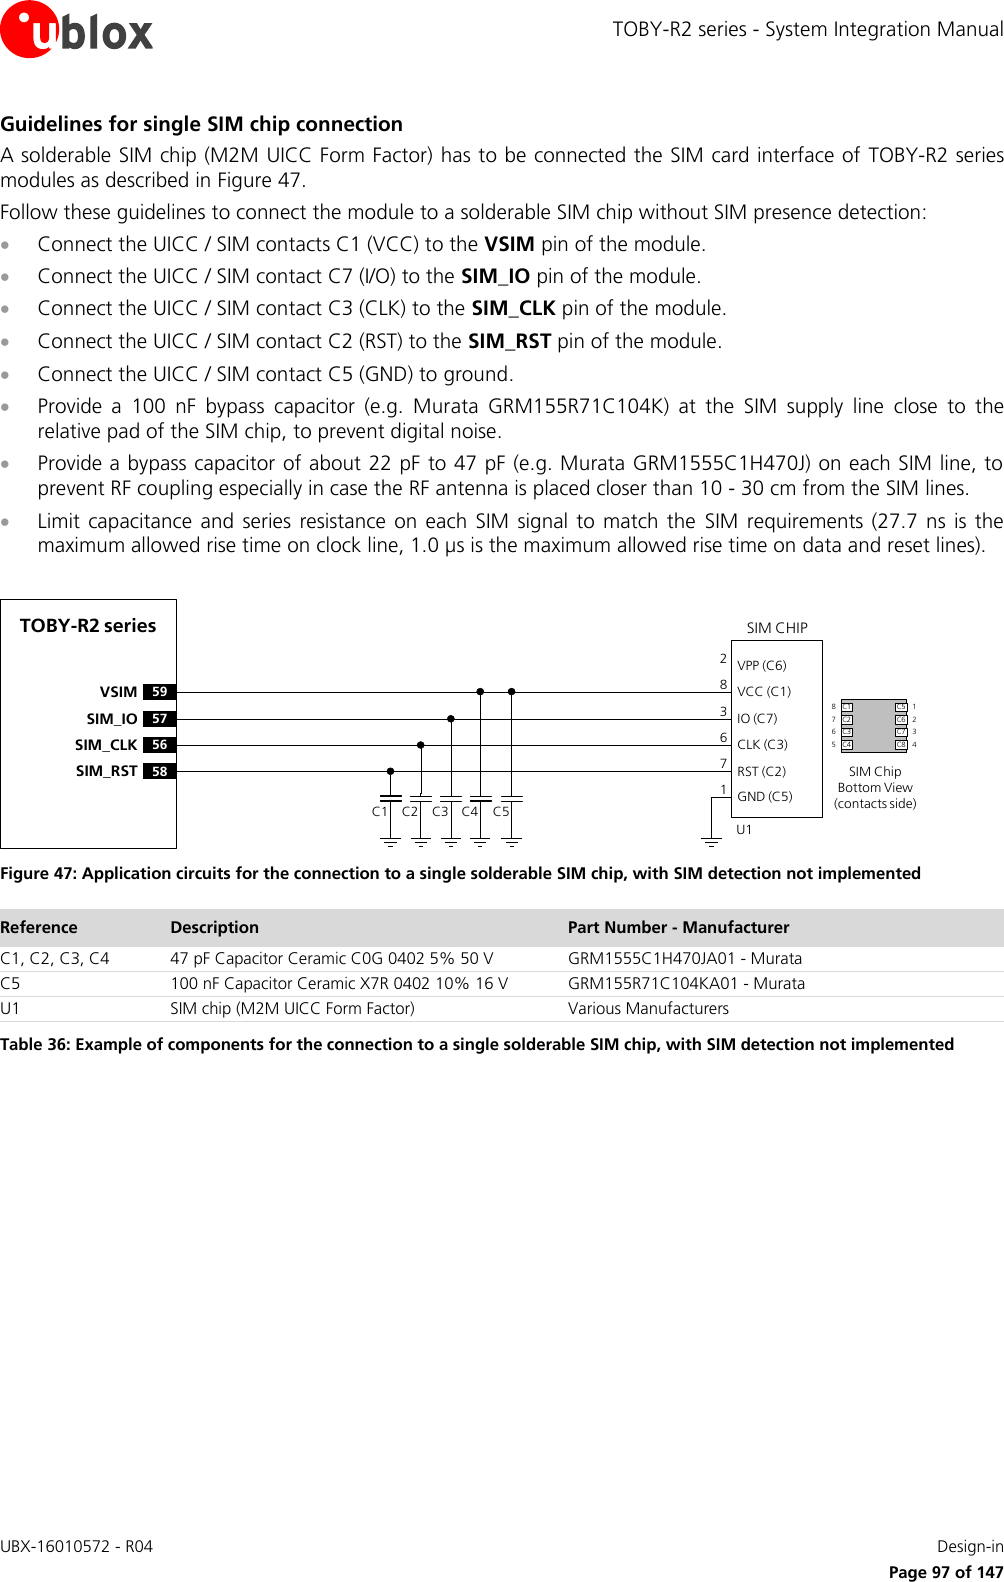 TOBY-R2 series - System Integration Manual UBX-16010572 - R04    Design-in     Page 97 of 147 Guidelines for single SIM chip connection A solderable SIM chip (M2M UICC Form Factor) has to be connected the SIM card interface of  TOBY-R2 series modules as described in Figure 47. Follow these guidelines to connect the module to a solderable SIM chip without SIM presence detection:  Connect the UICC / SIM contacts C1 (VCC) to the VSIM pin of the module.  Connect the UICC / SIM contact C7 (I/O) to the SIM_IO pin of the module.  Connect the UICC / SIM contact C3 (CLK) to the SIM_CLK pin of the module.  Connect the UICC / SIM contact C2 (RST) to the SIM_RST pin of the module.  Connect the UICC / SIM contact C5 (GND) to ground.  Provide  a  100  nF  bypass  capacitor  (e.g.  Murata  GRM155R71C104K)  at  the  SIM  supply  line  close  to  the relative pad of the SIM chip, to prevent digital noise.   Provide a bypass capacitor of about 22 pF to 47 pF (e.g. Murata GRM1555C1H470J) on each SIM line, to prevent RF coupling especially in case the RF antenna is placed closer than 10 - 30 cm from the SIM lines.  Limit capacitance  and  series resistance  on each  SIM  signal  to match  the  SIM  requirements (27.7  ns  is the maximum allowed rise time on clock line, 1.0 µs is the maximum allowed rise time on data and reset lines).  TOBY-R2 series59VSIM57SIM_IO56SIM_CLK58SIM_RSTSIM CHIPSIM ChipBottom View (contacts side)C1VPP (C6)VCC (C1)IO (C7)CLK (C3)RST (C2)GND (C5)C2 C3 C5U1C4283671C1 C5C2 C6C3 C7C4 C887651234 Figure 47: Application circuits for the connection to a single solderable SIM chip, with SIM detection not implemented Reference Description Part Number - Manufacturer C1, C2, C3, C4 47 pF Capacitor Ceramic C0G 0402 5% 50 V GRM1555C1H470JA01 - Murata C5 100 nF Capacitor Ceramic X7R 0402 10% 16 V GRM155R71C104KA01 - Murata U1 SIM chip (M2M UICC Form Factor) Various Manufacturers Table 36: Example of components for the connection to a single solderable SIM chip, with SIM detection not implemented   